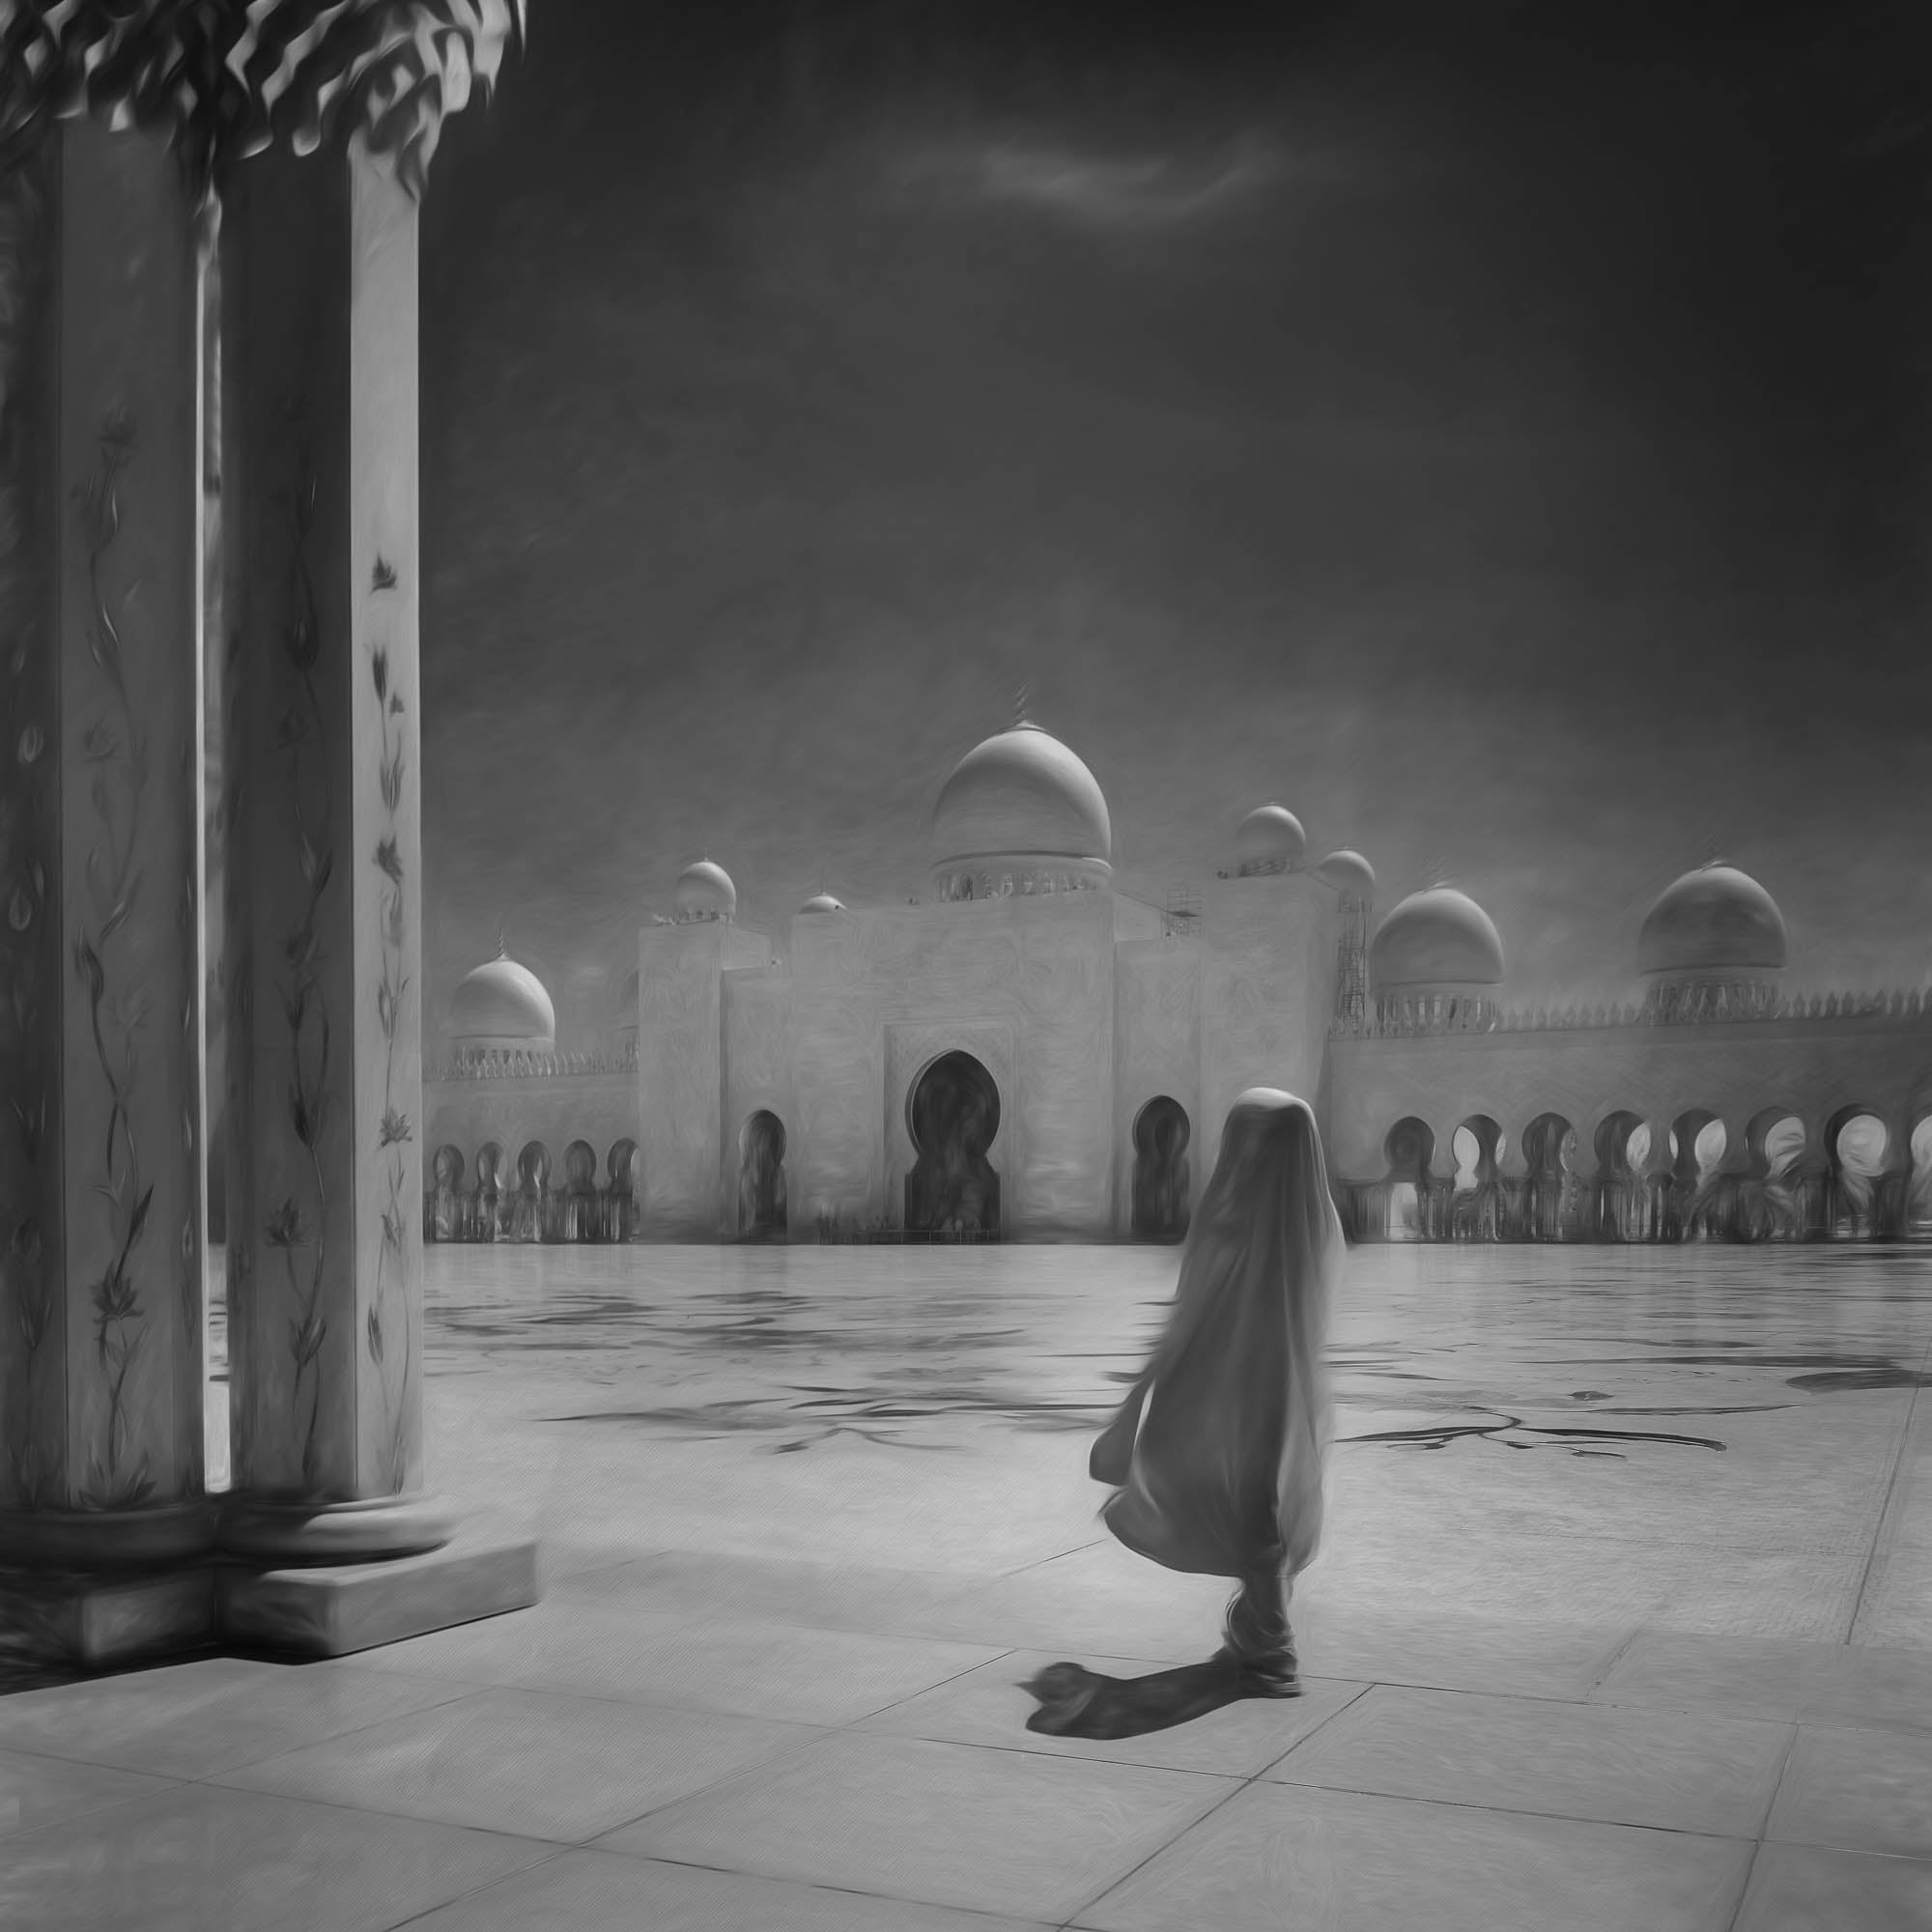 A woman in traditional attire stands alone amidst the grandeur of the Grand Mosque in Abu Dhabi, portrayed in black and white.